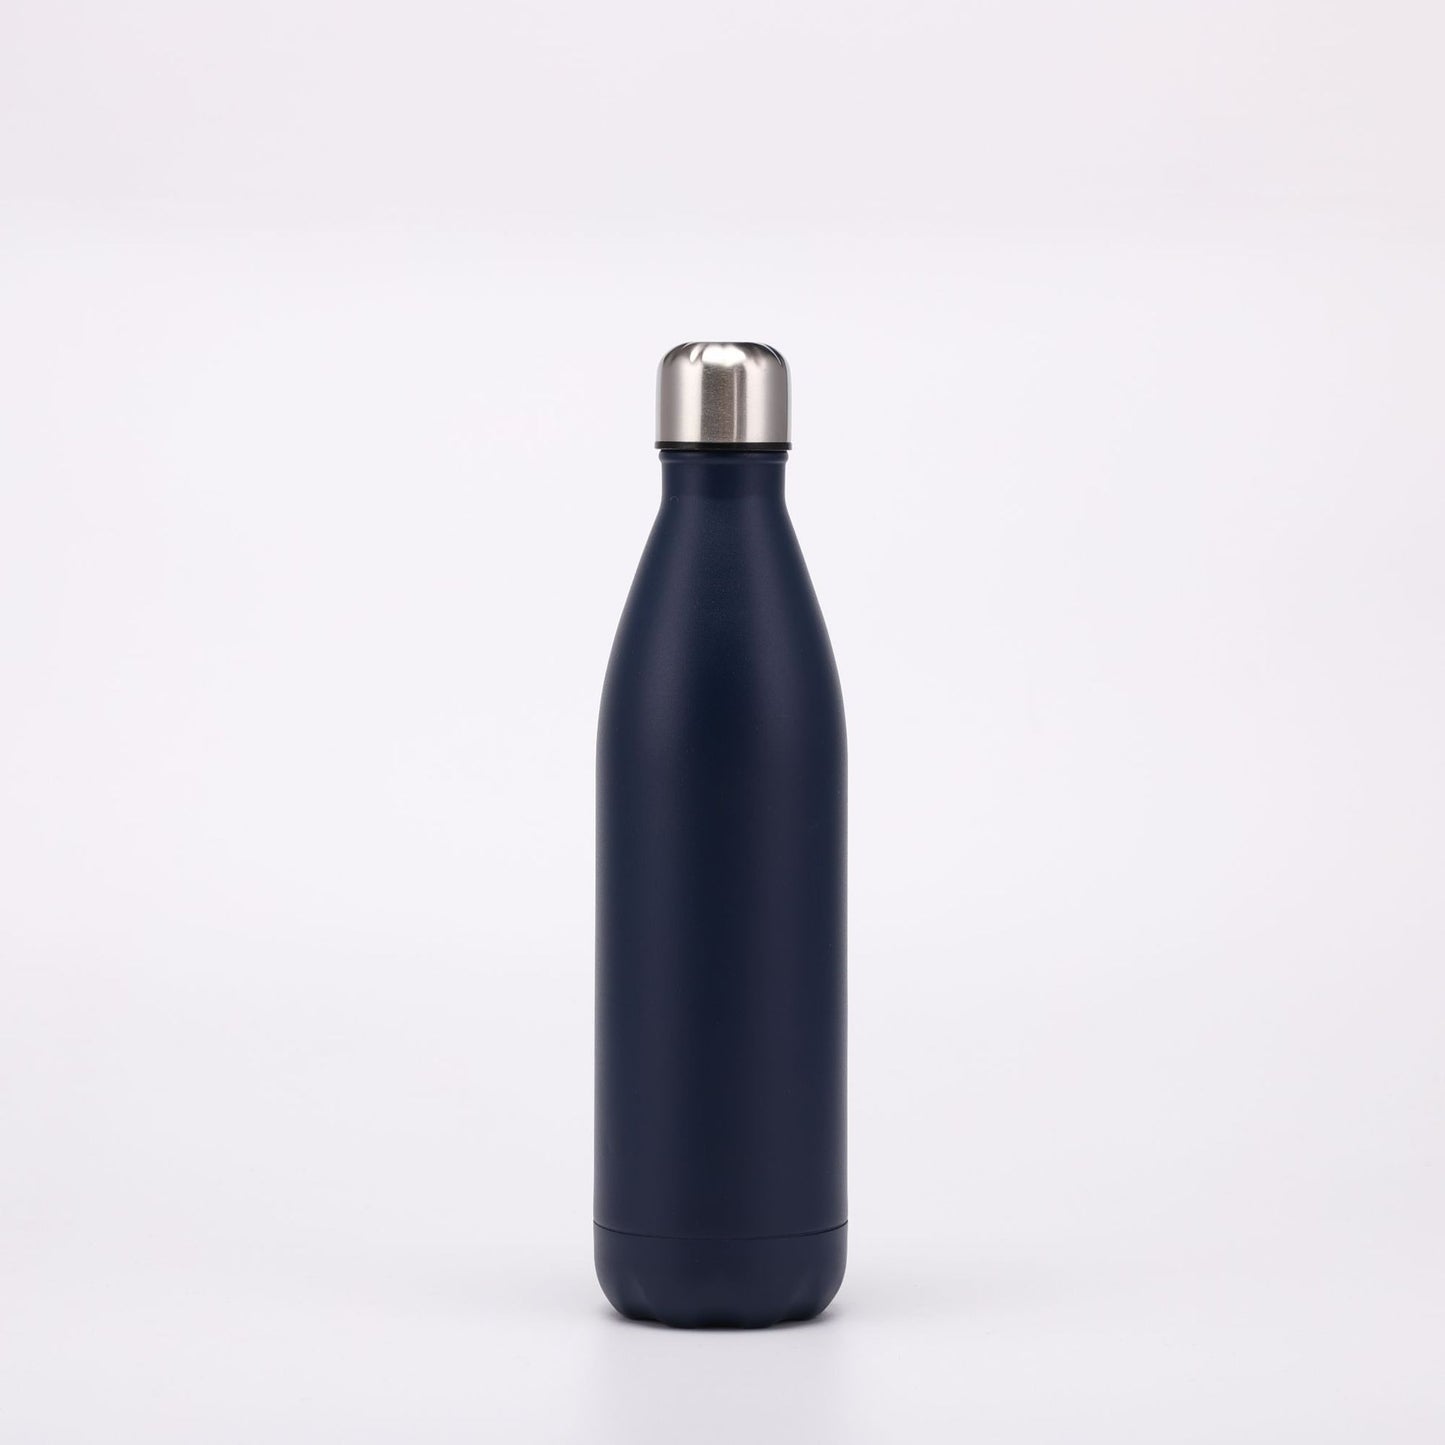 750ML Stainless Steel Water Bottle Thermos Flask, Double-Walled Leak-Proof Insulated Water Bottle for Running, Cycling, Camping